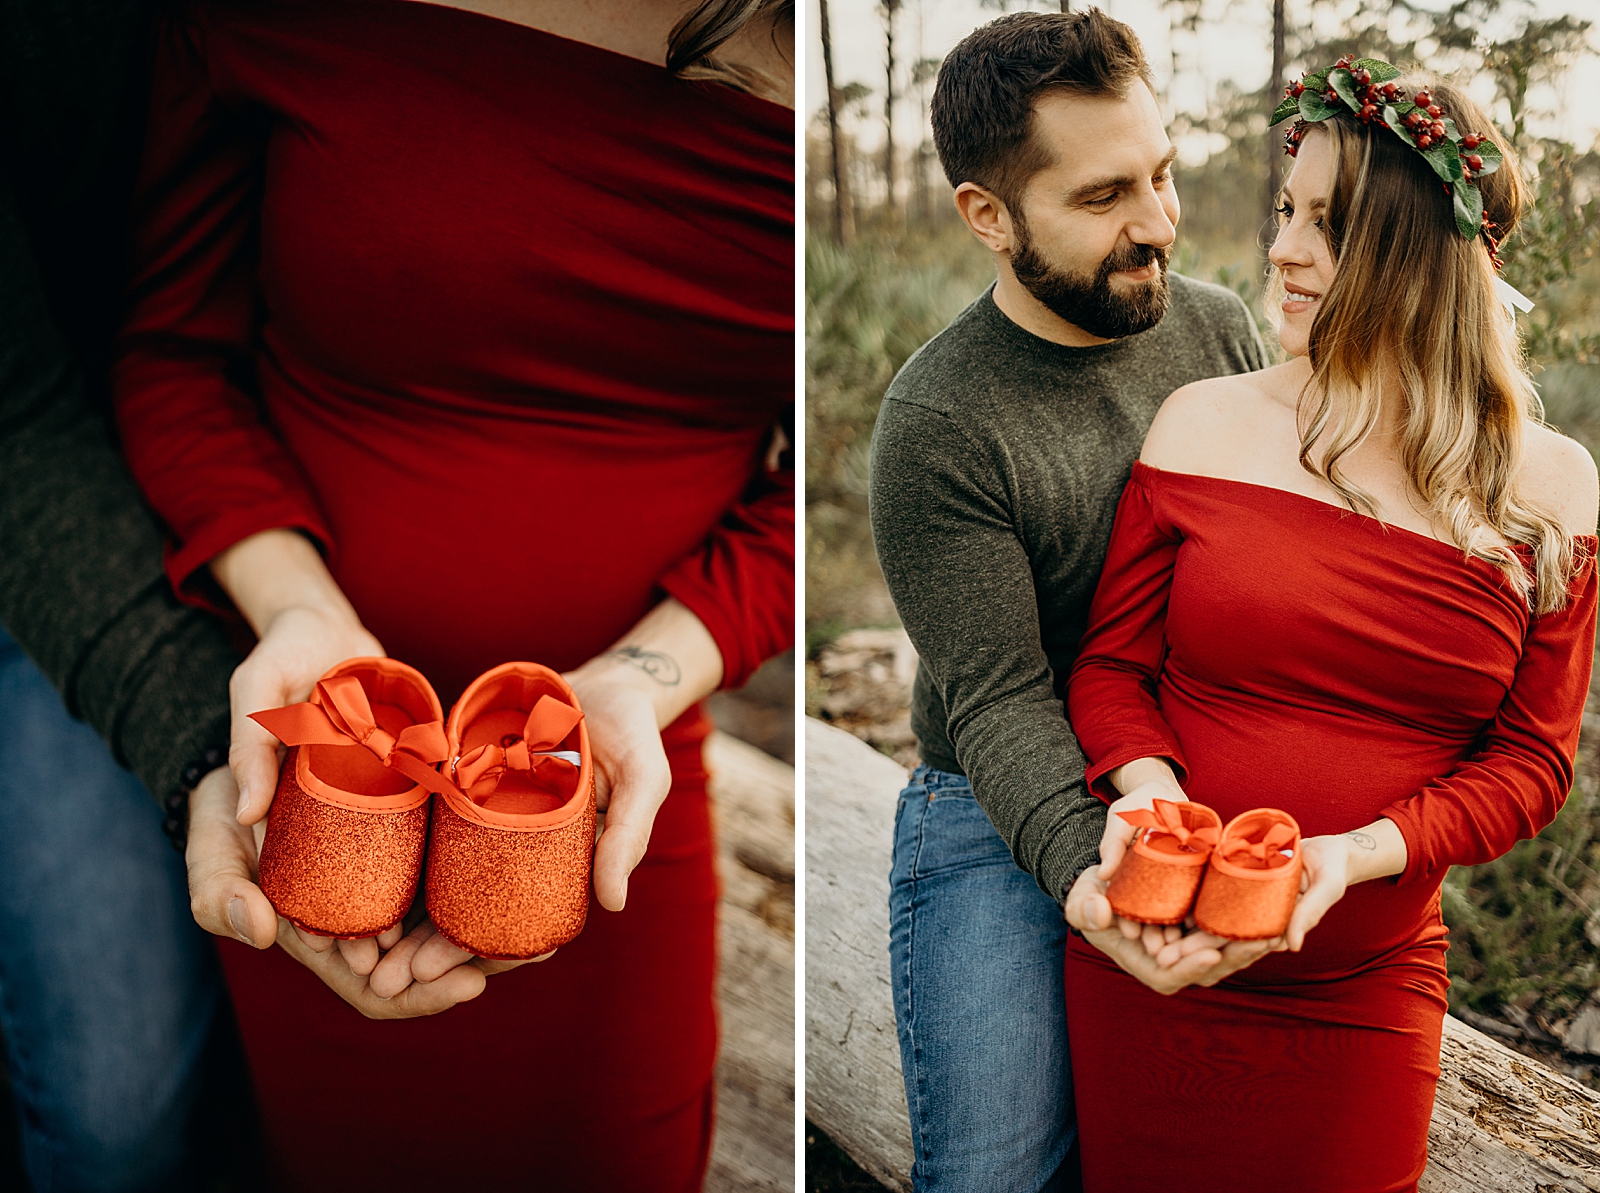 Couple holding soon to be born baby's red shoes Johnathan Dickinson Park Maternity Photography captured by South Florida Family Photographer Maggie Alvarez Photography